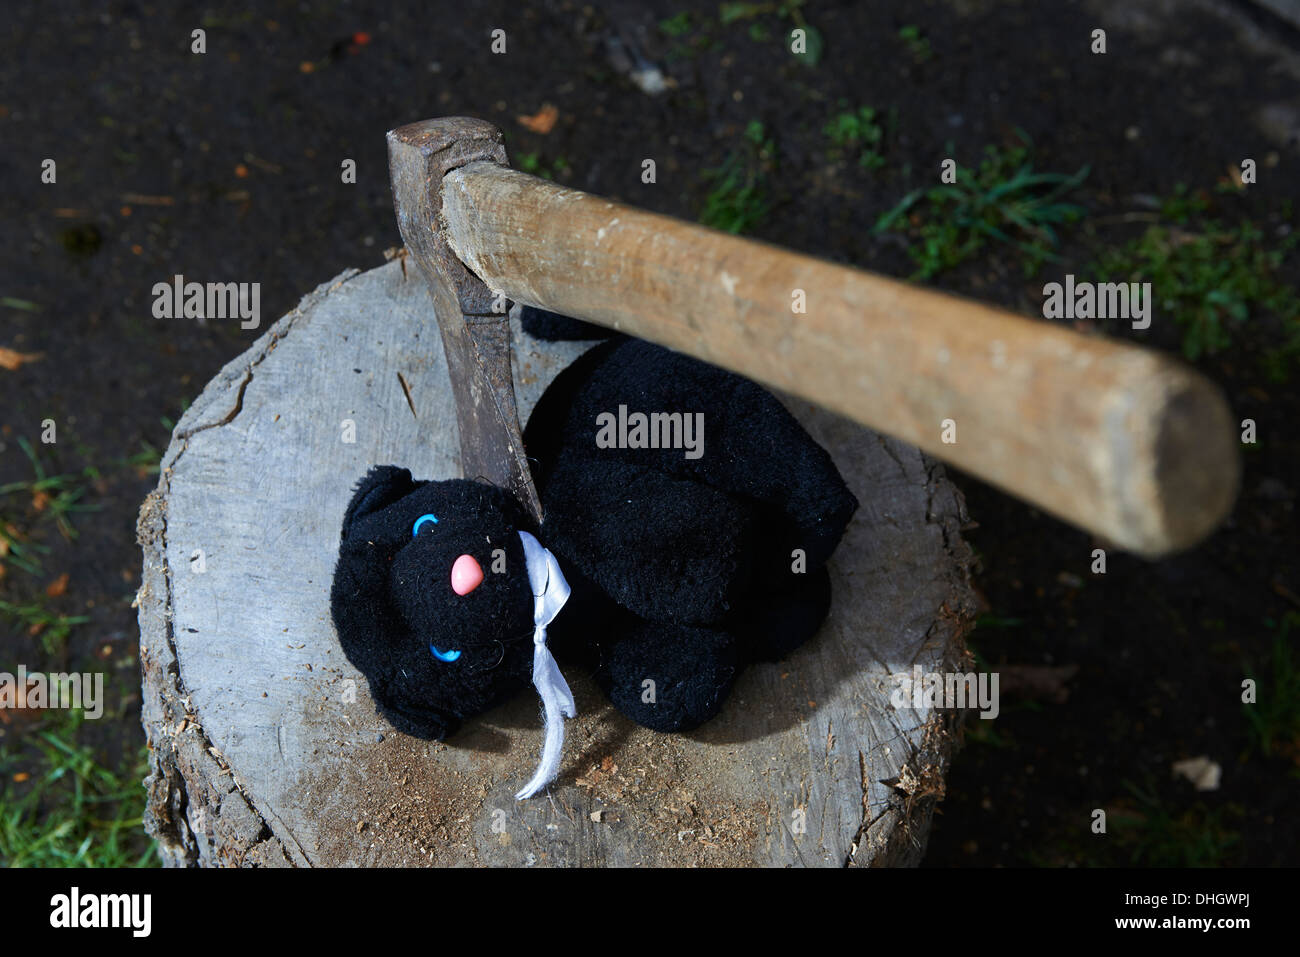 Execution - murder of child cuddly toy black cat with an ax Stock Photo